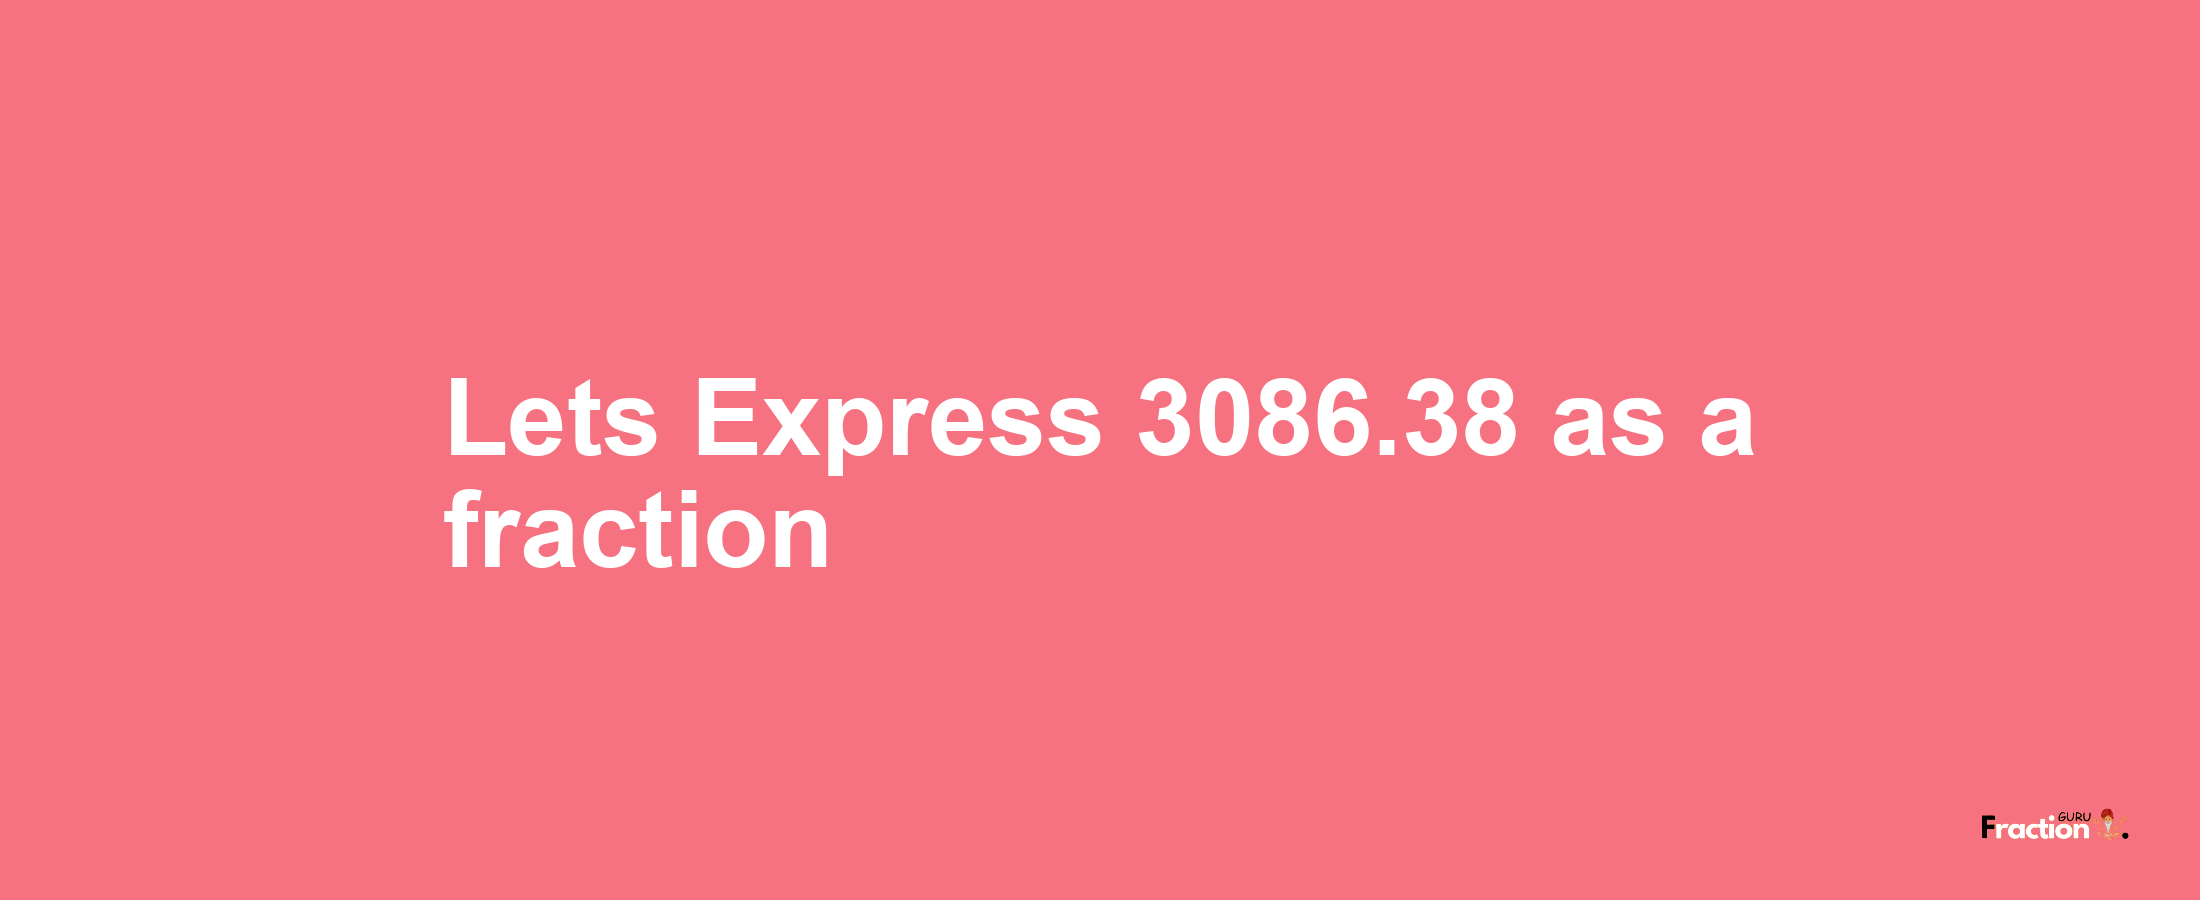 Lets Express 3086.38 as afraction